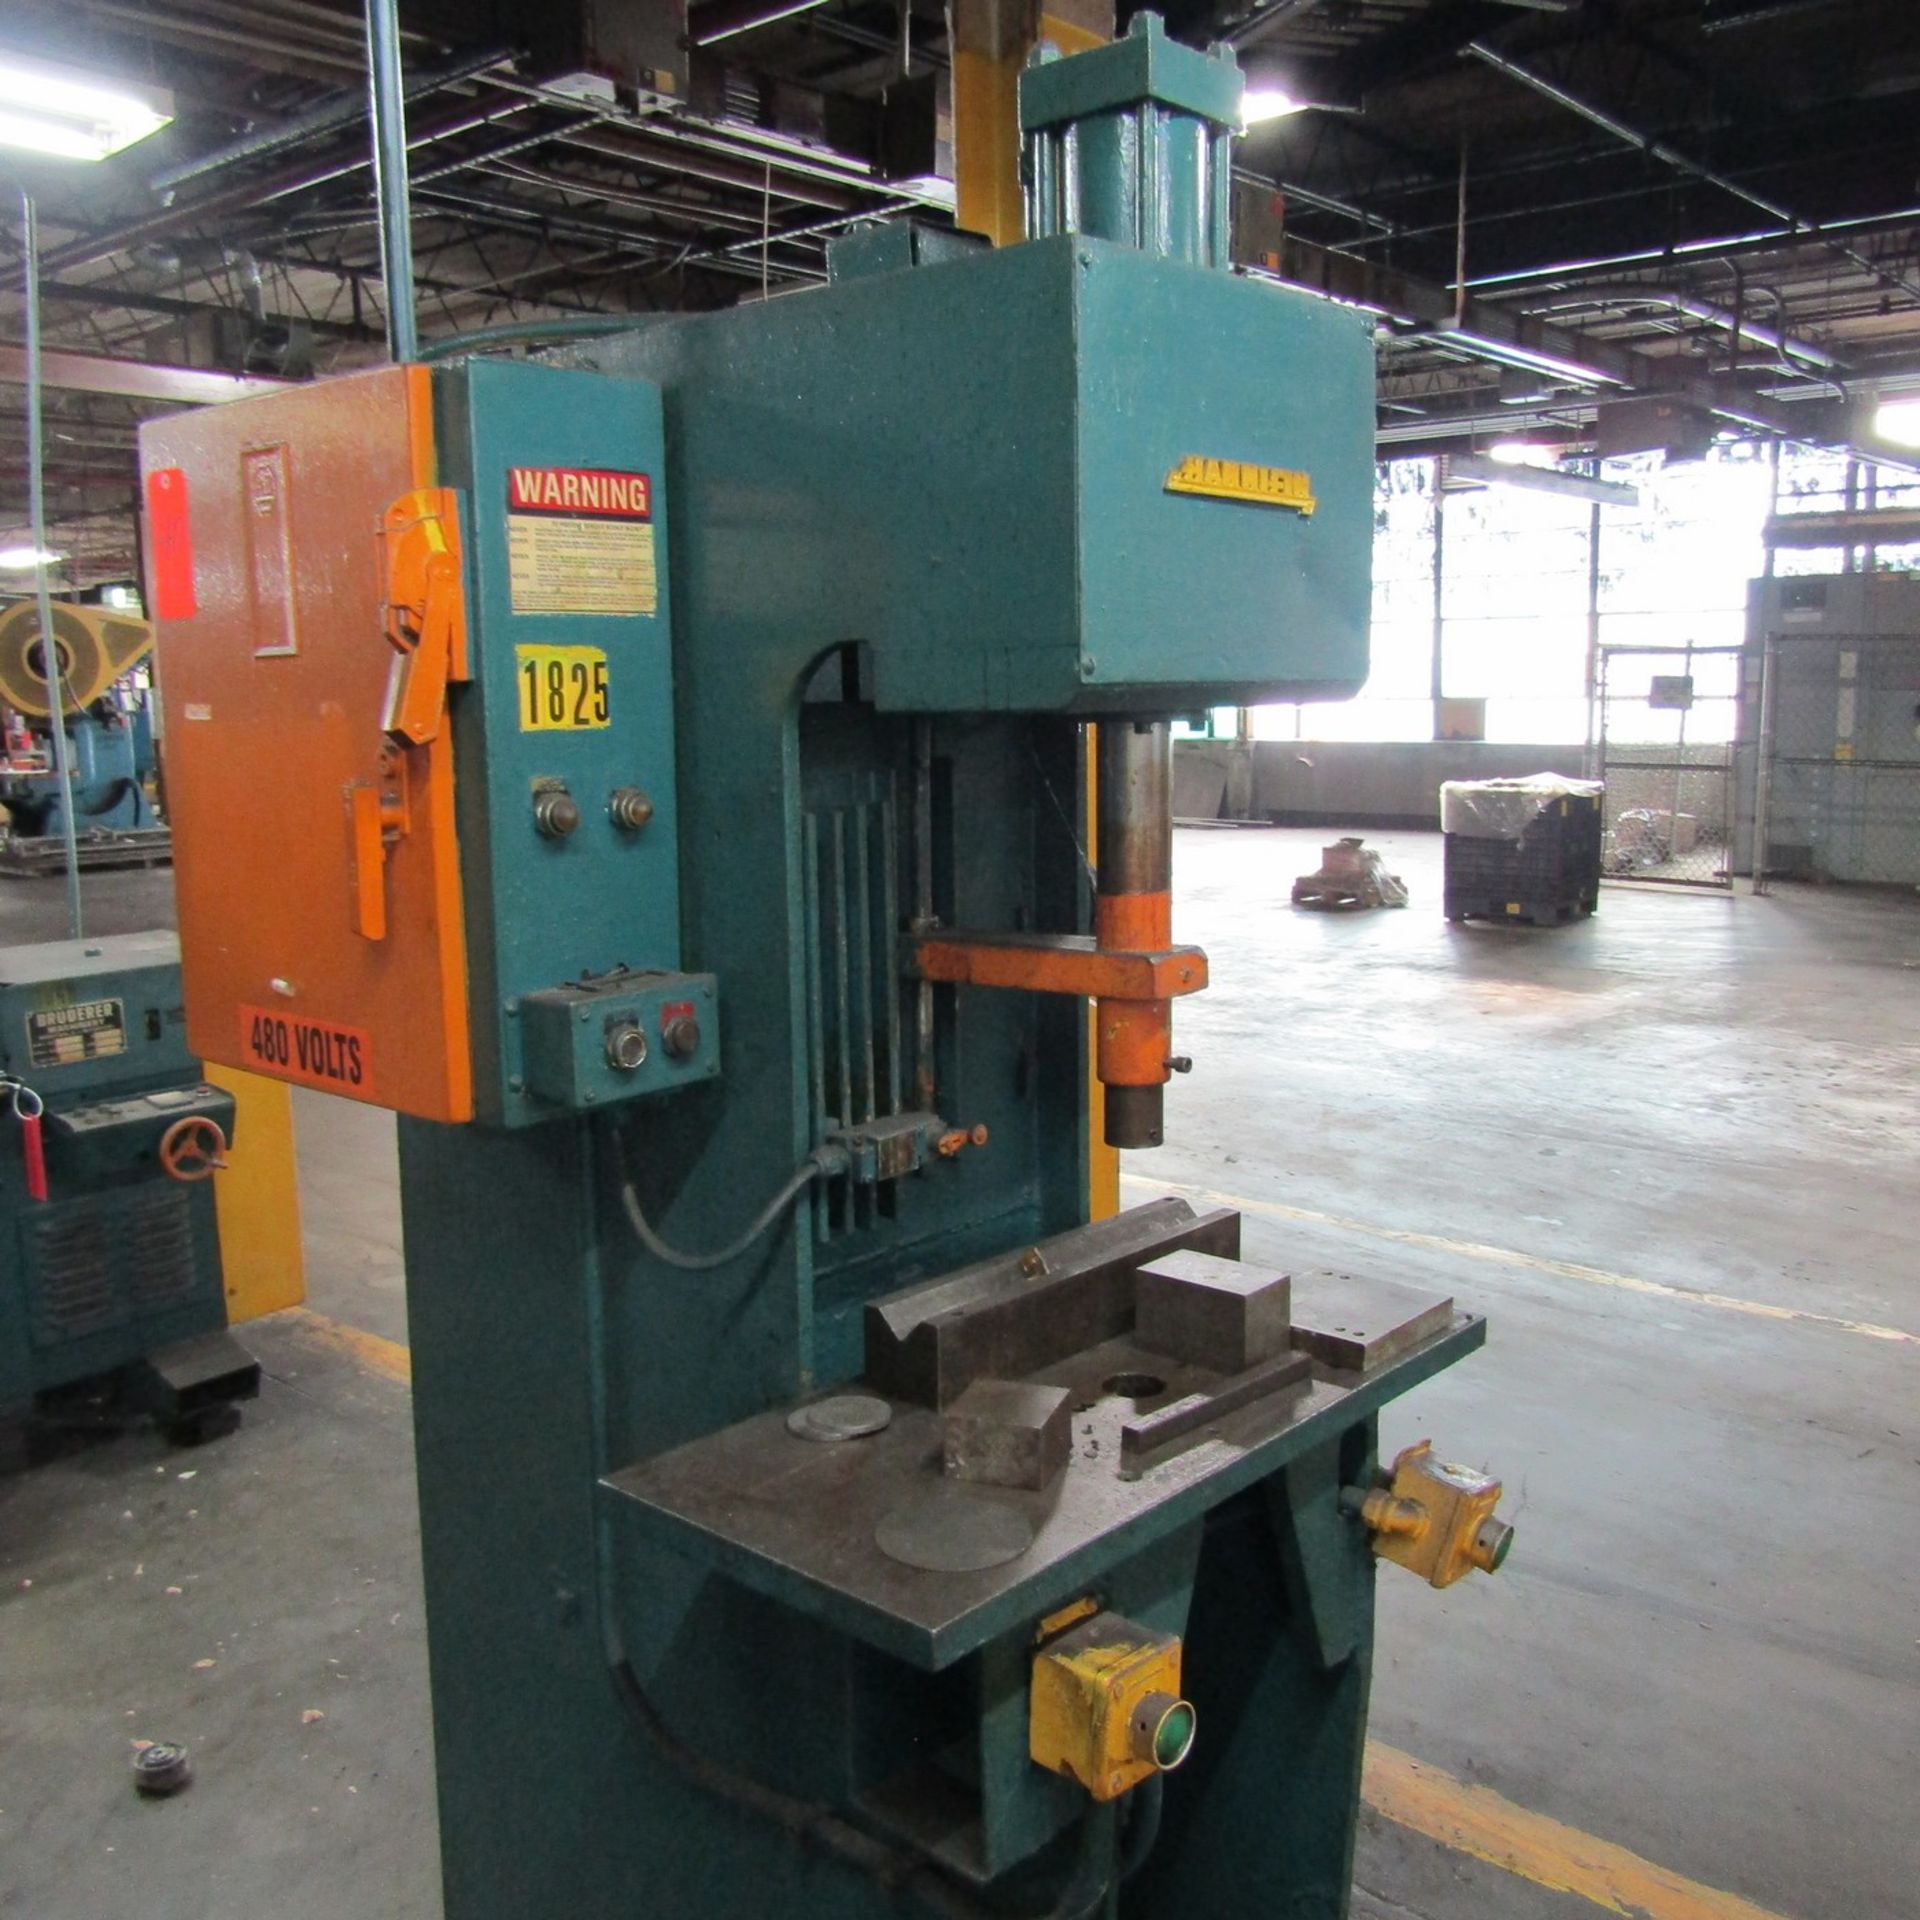 Hannifin 8-Ton Cap. Model F 21-41-M Hydraulic Press, S/N: E 37373-4; Rated at 3,000-PSI, Palm - Image 3 of 6